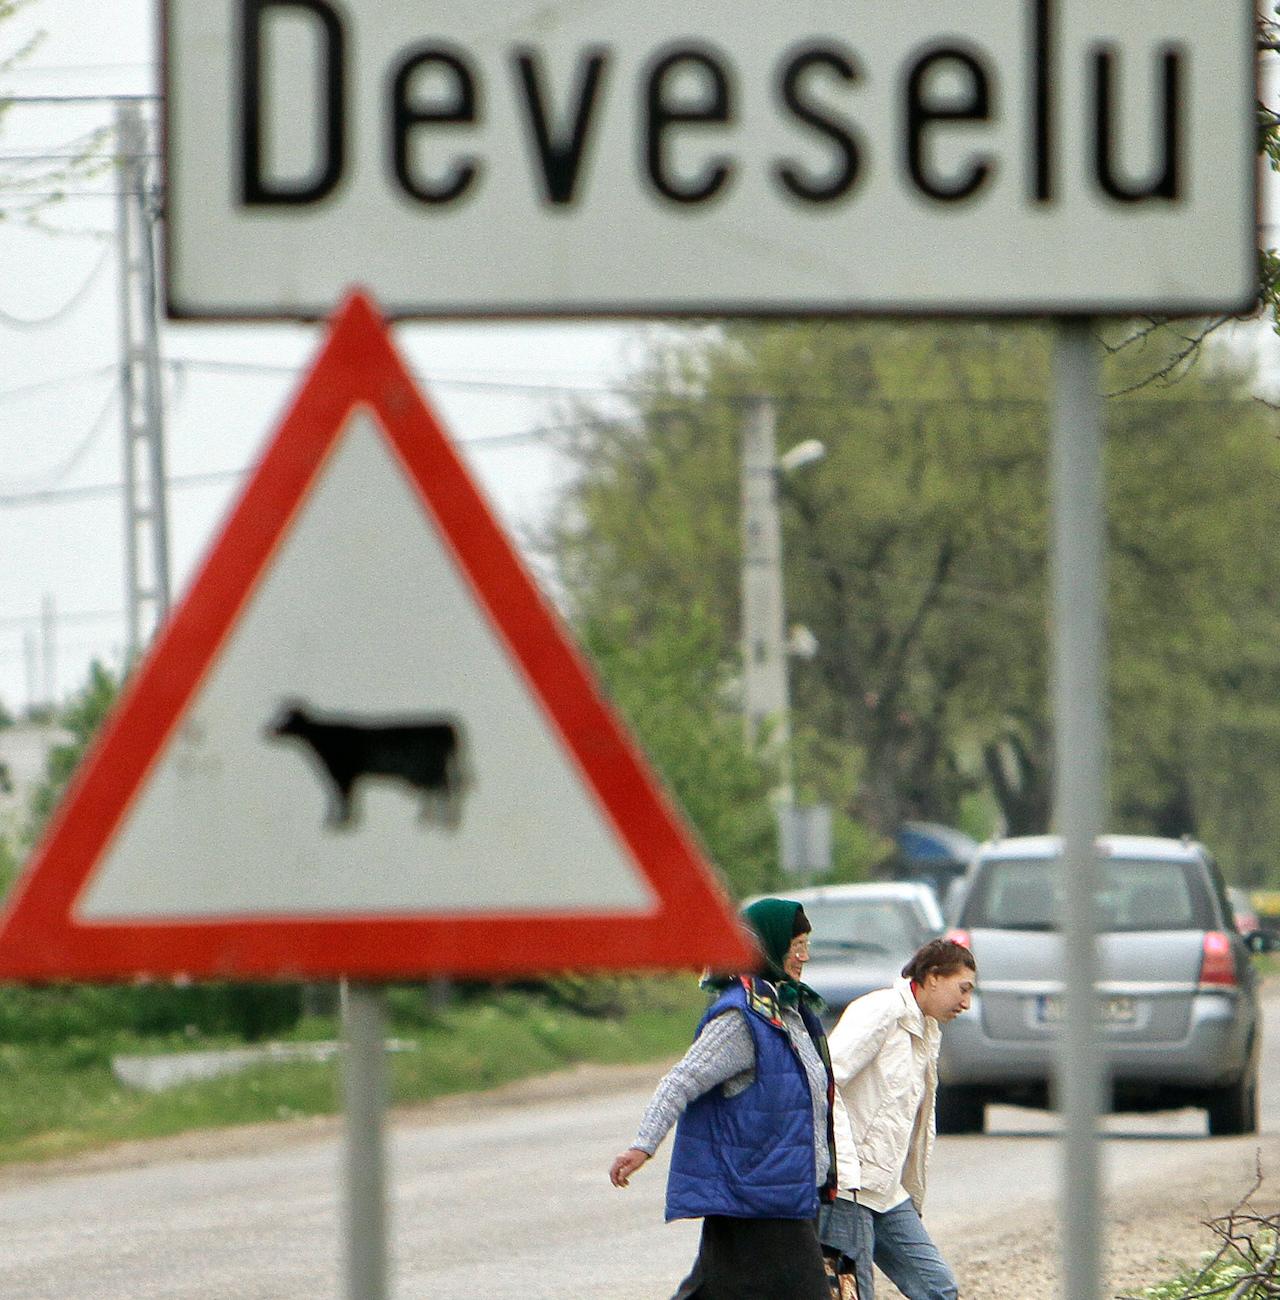 Romanians cross the road in the village of Deveselu in southern Romania in this May 3, 2011 file photo. Photo: AP